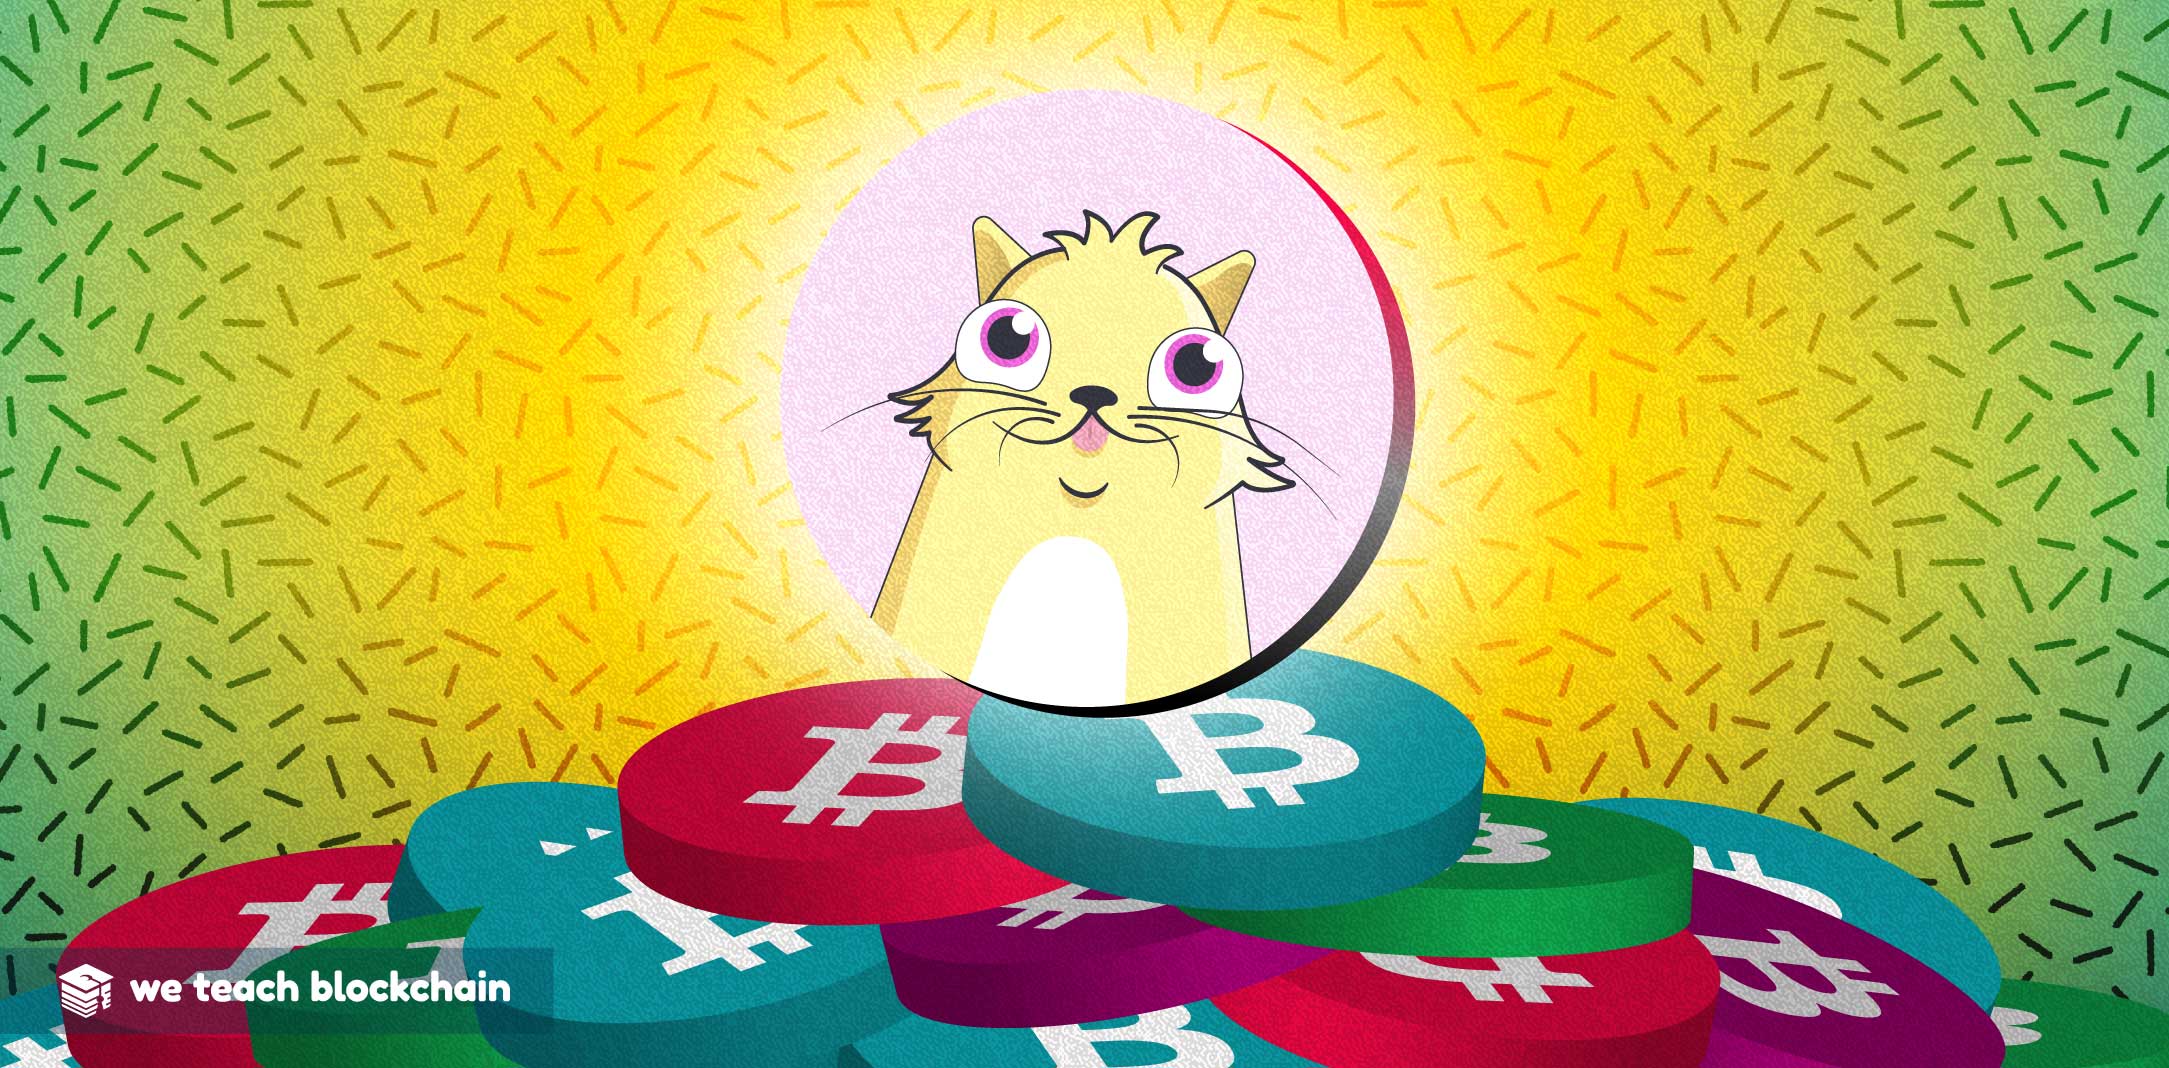 Cryptokitties logo over a pile of colored coins